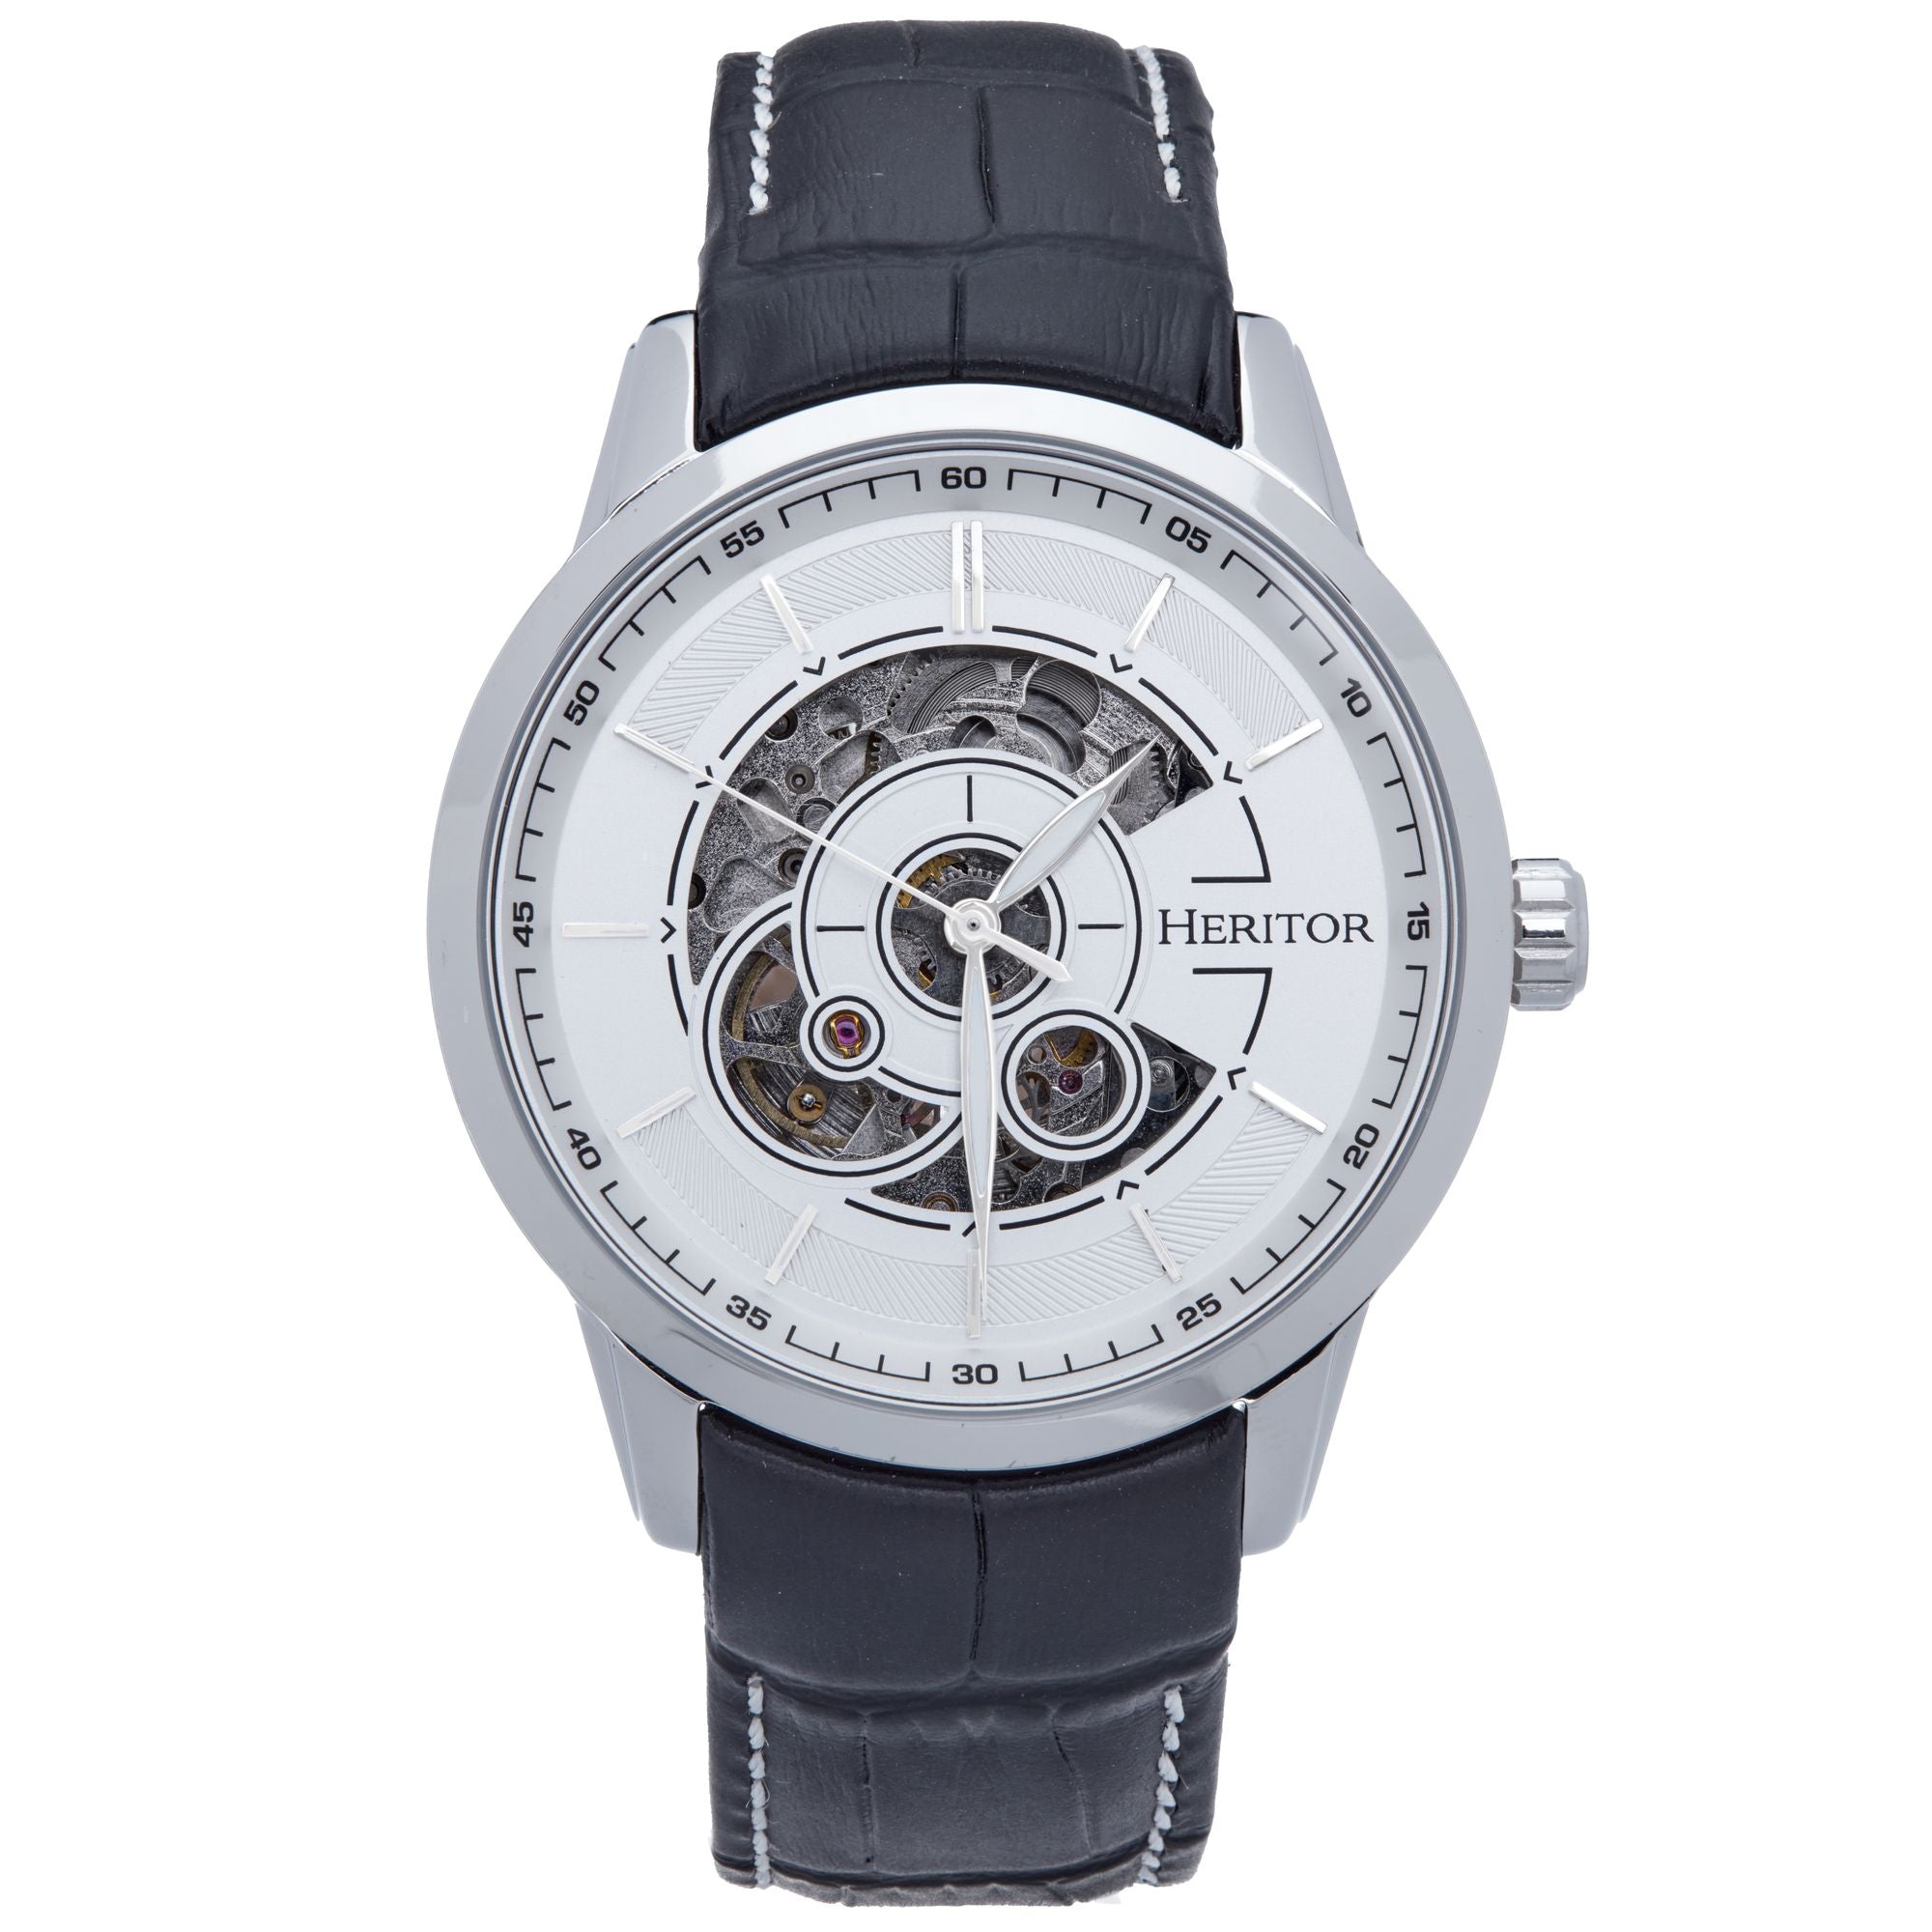 Men’s White / Silver Davies Semi-Skeleton Leather-Band Watch - Silver, White One Size Heritor Automatic